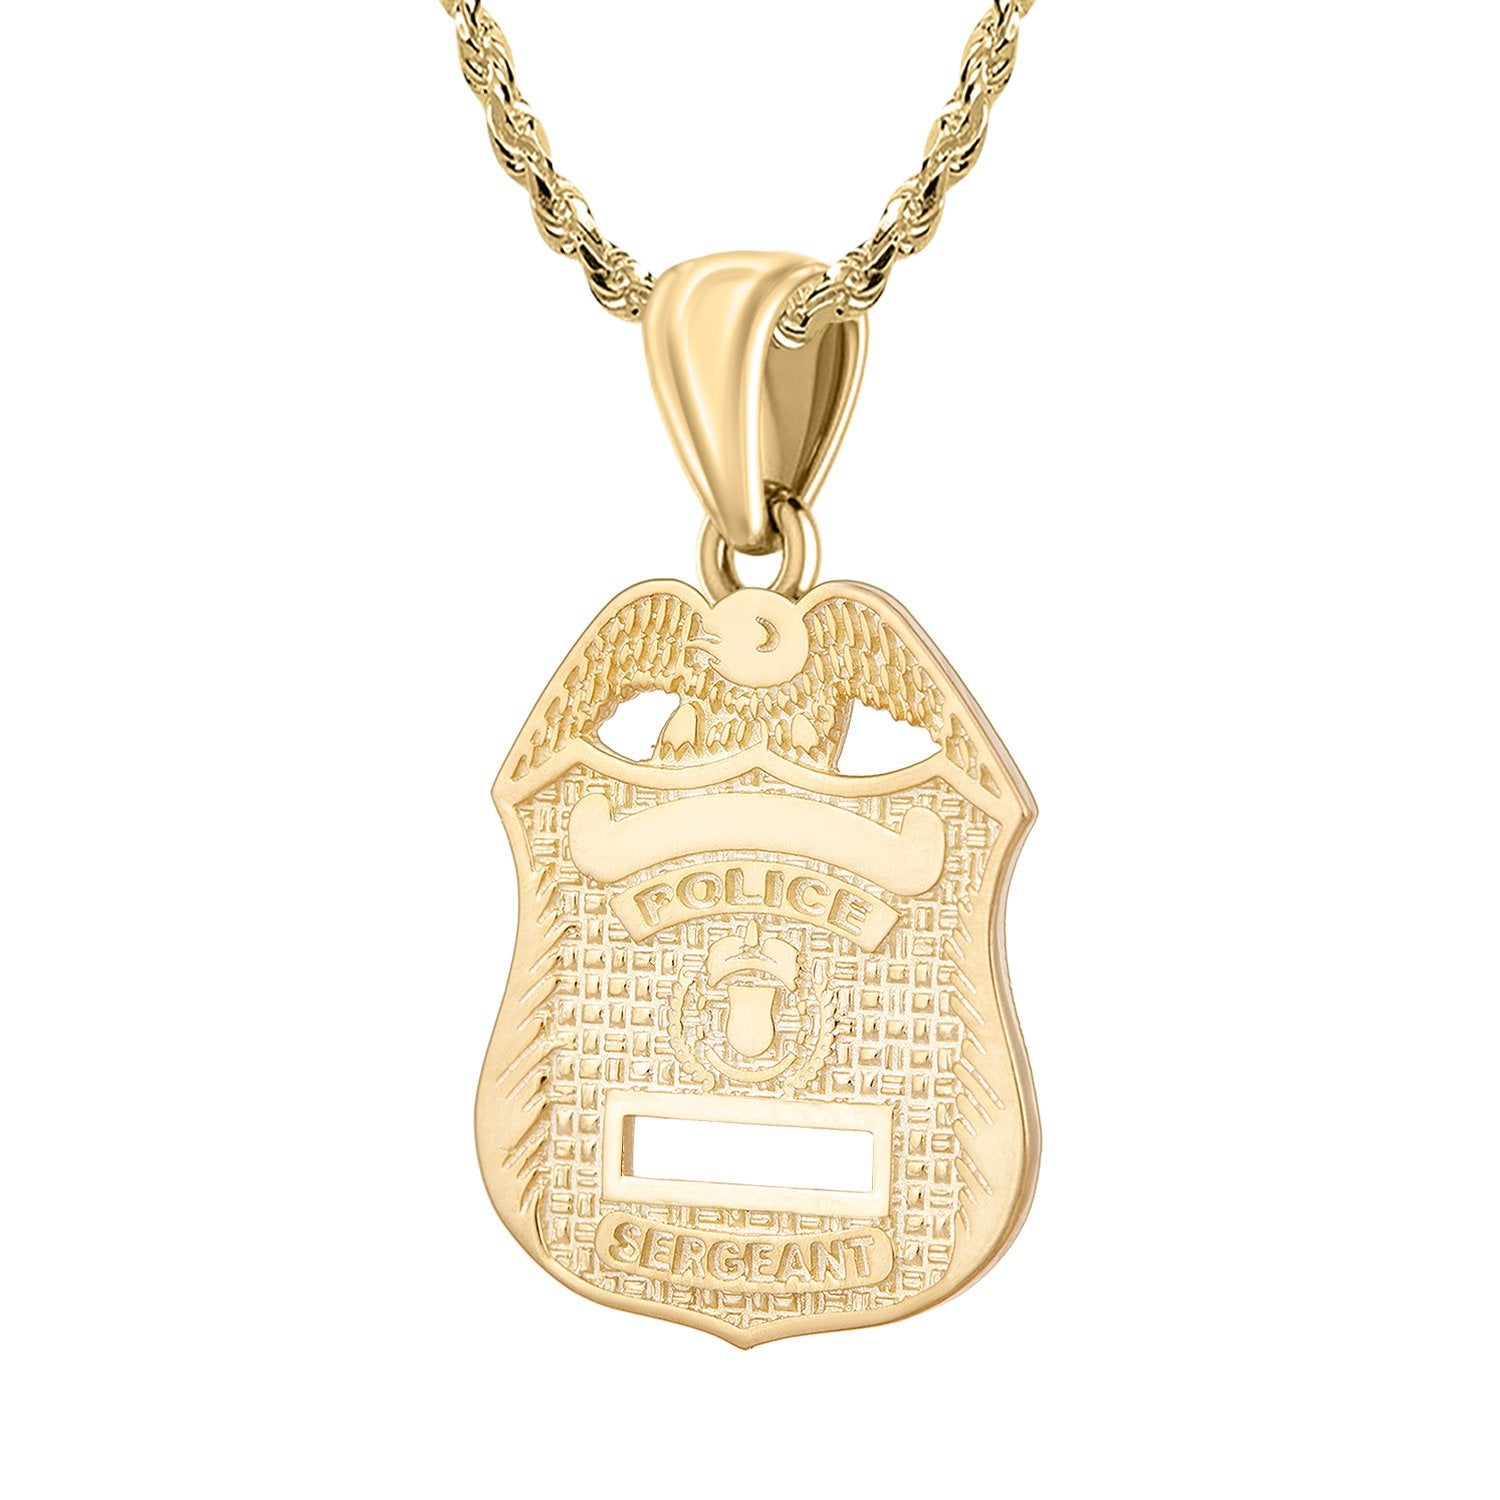 Police Badge Necklace In Gold For Men - 2mm Rope Chain